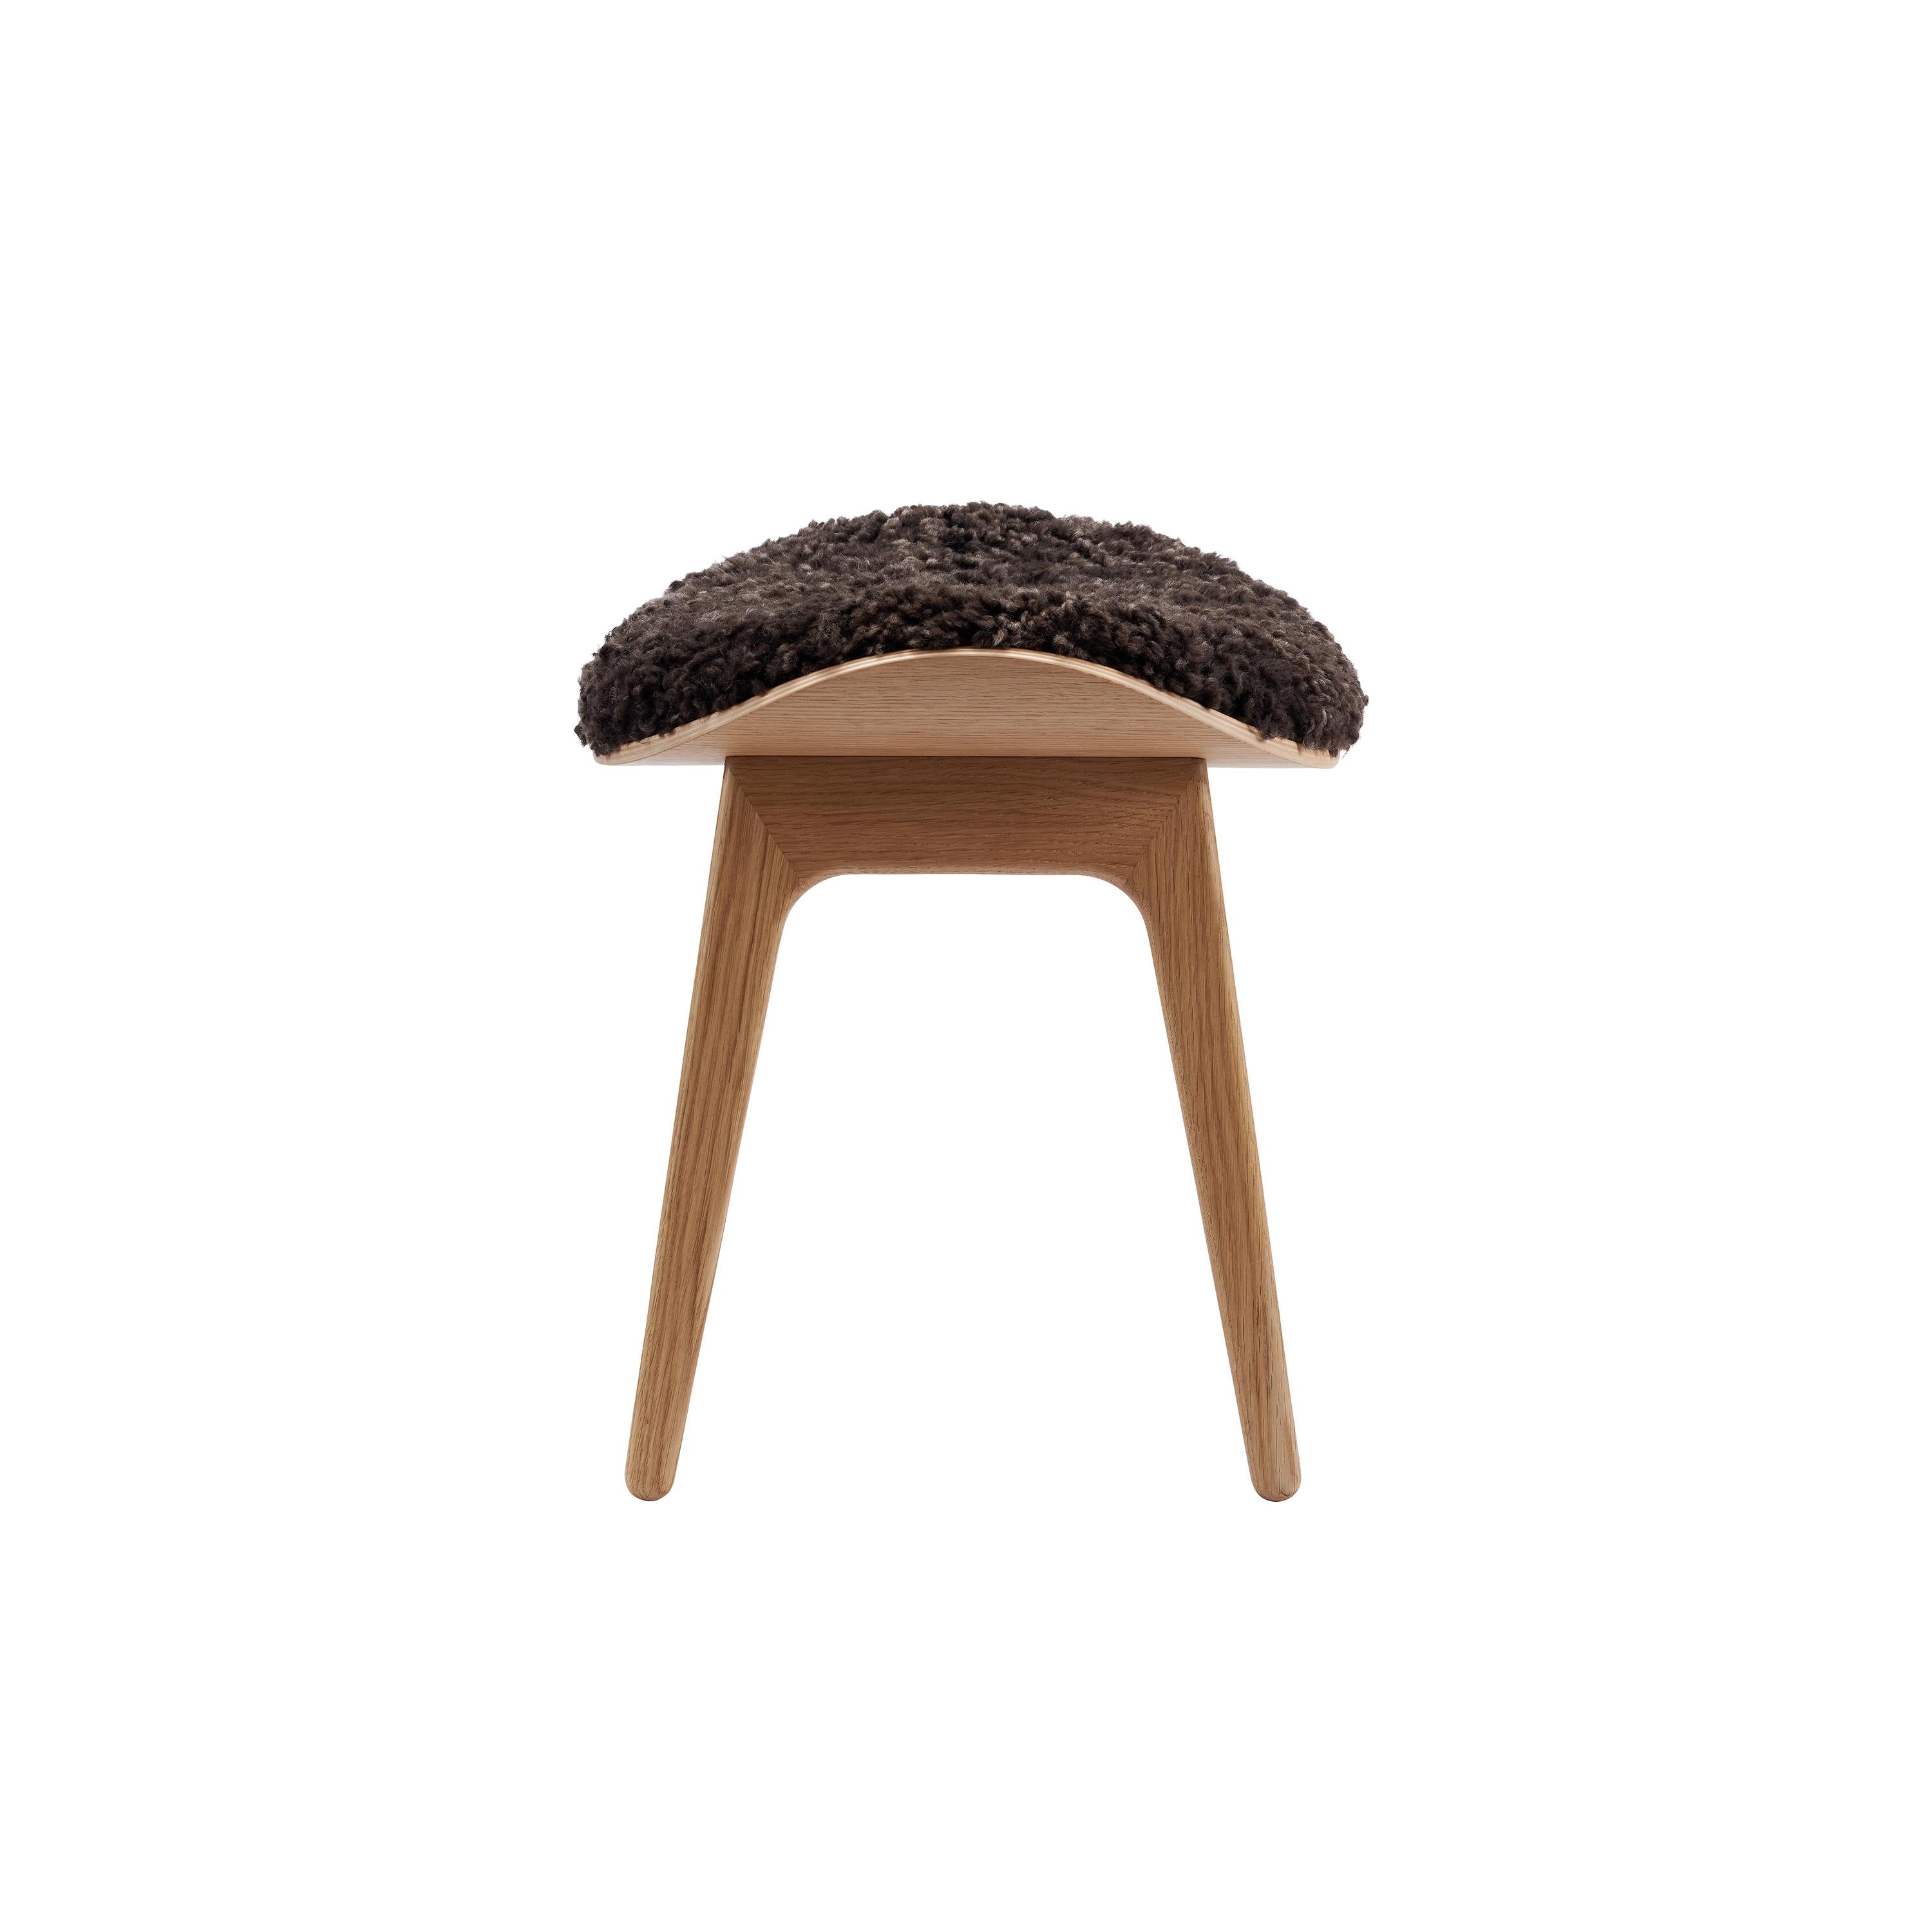 Contemporary 'Elephant' Lounge Chair + Stool, Natural Oak, Sheepskin Set by Norr11 For Sale